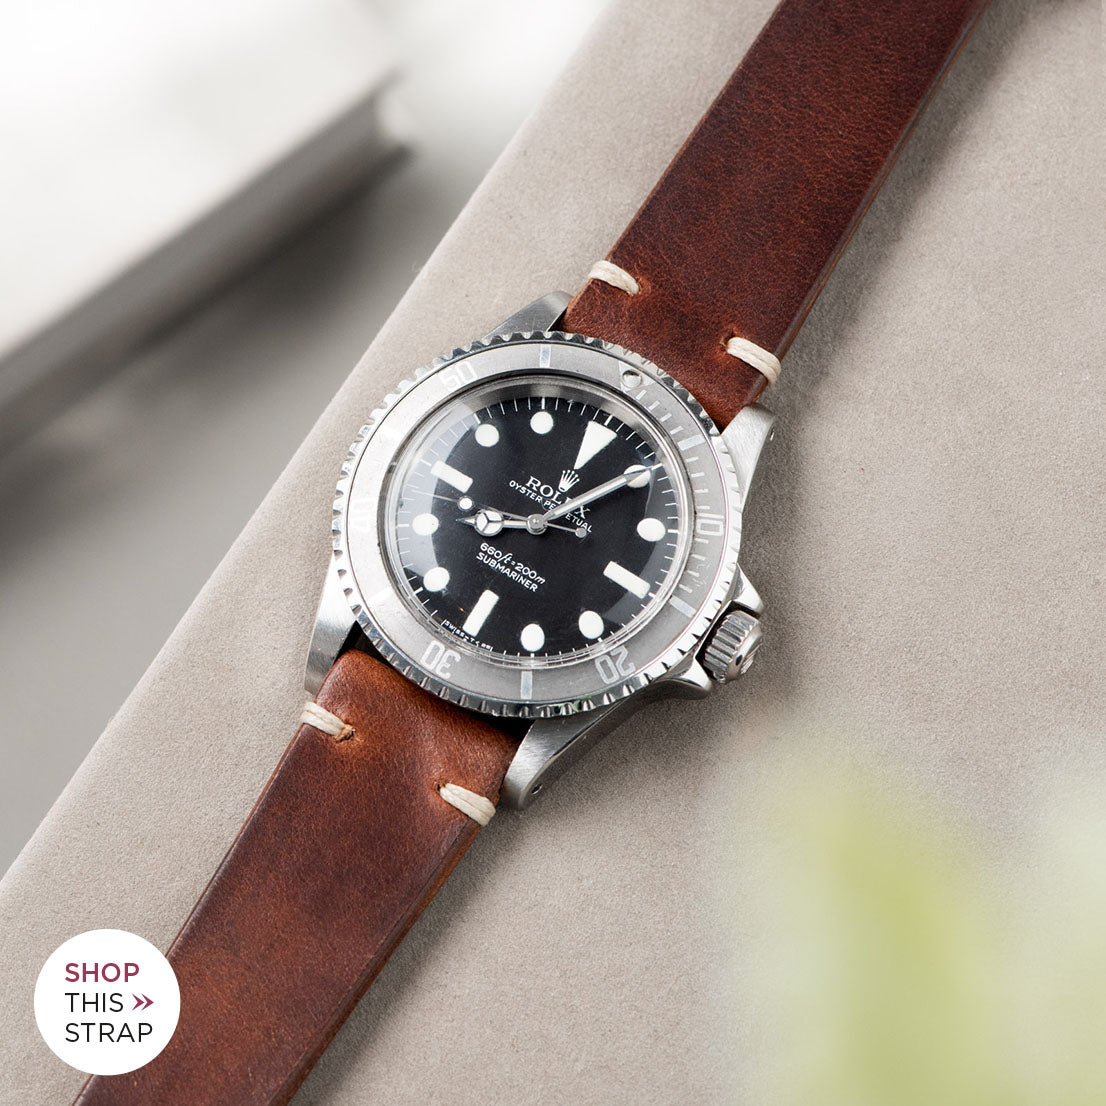 Bulang and Sons_Strap Guide_The Rolex 5513 Faded Maxi Submariner_ Siena Brown Leather Watch Strap